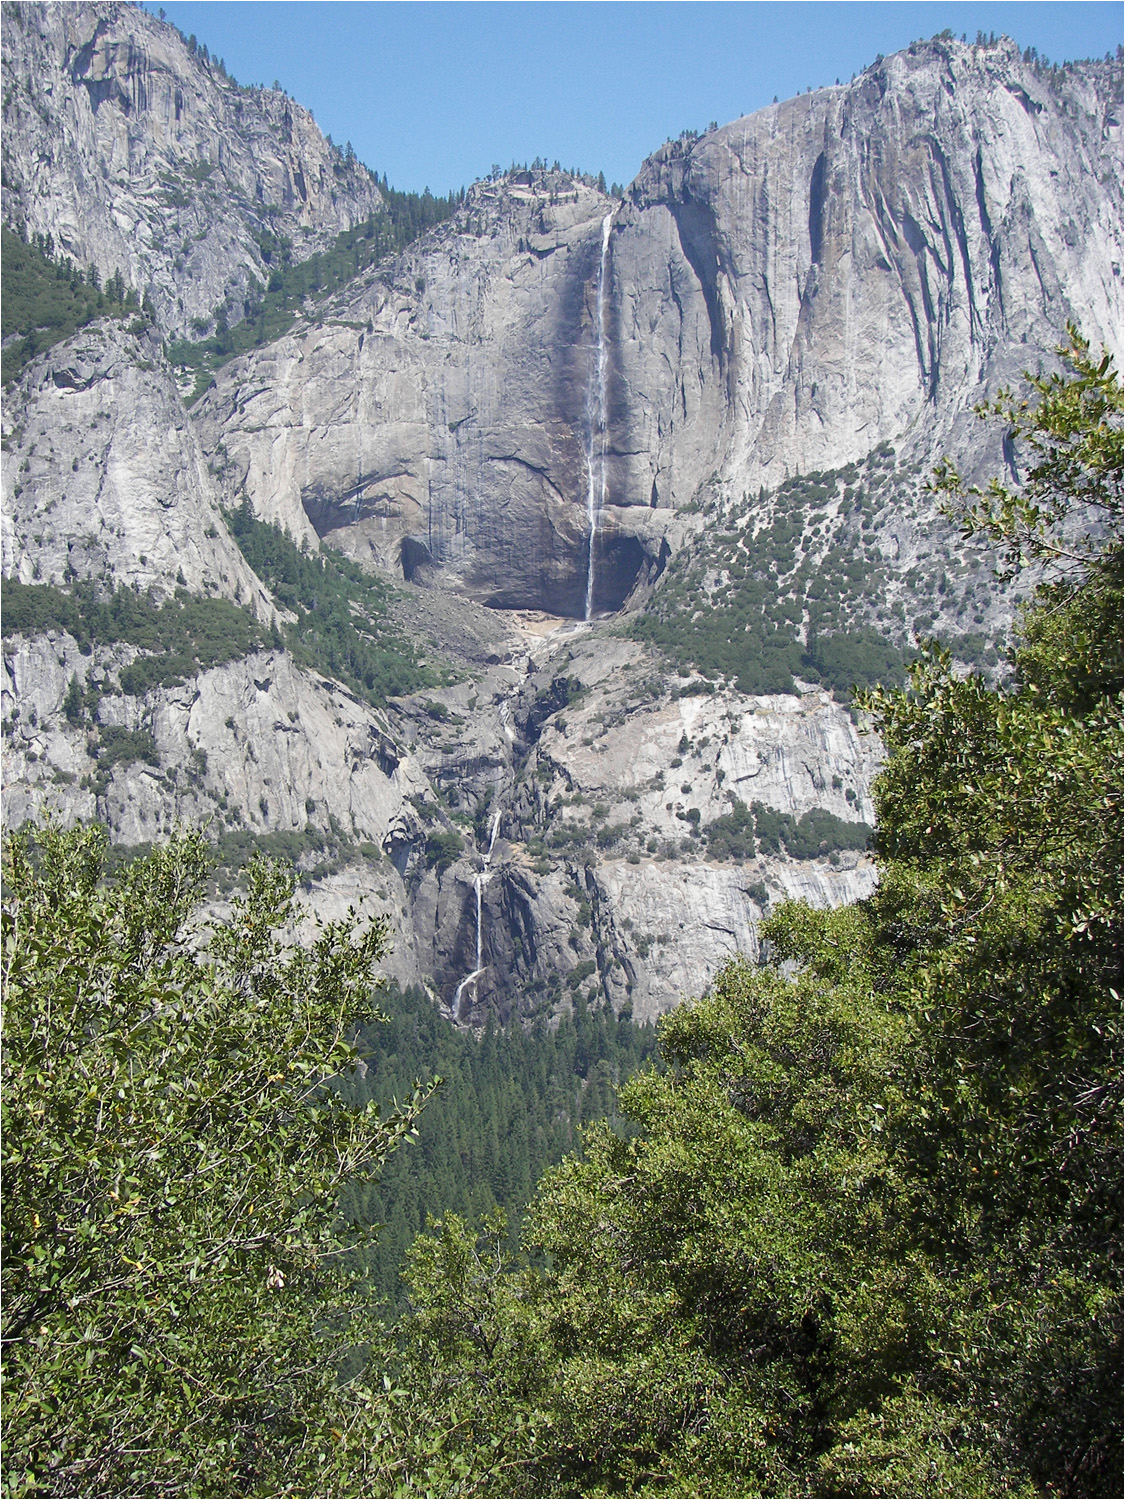 Glacier Point Hike-View of Yosemite Falls from trail